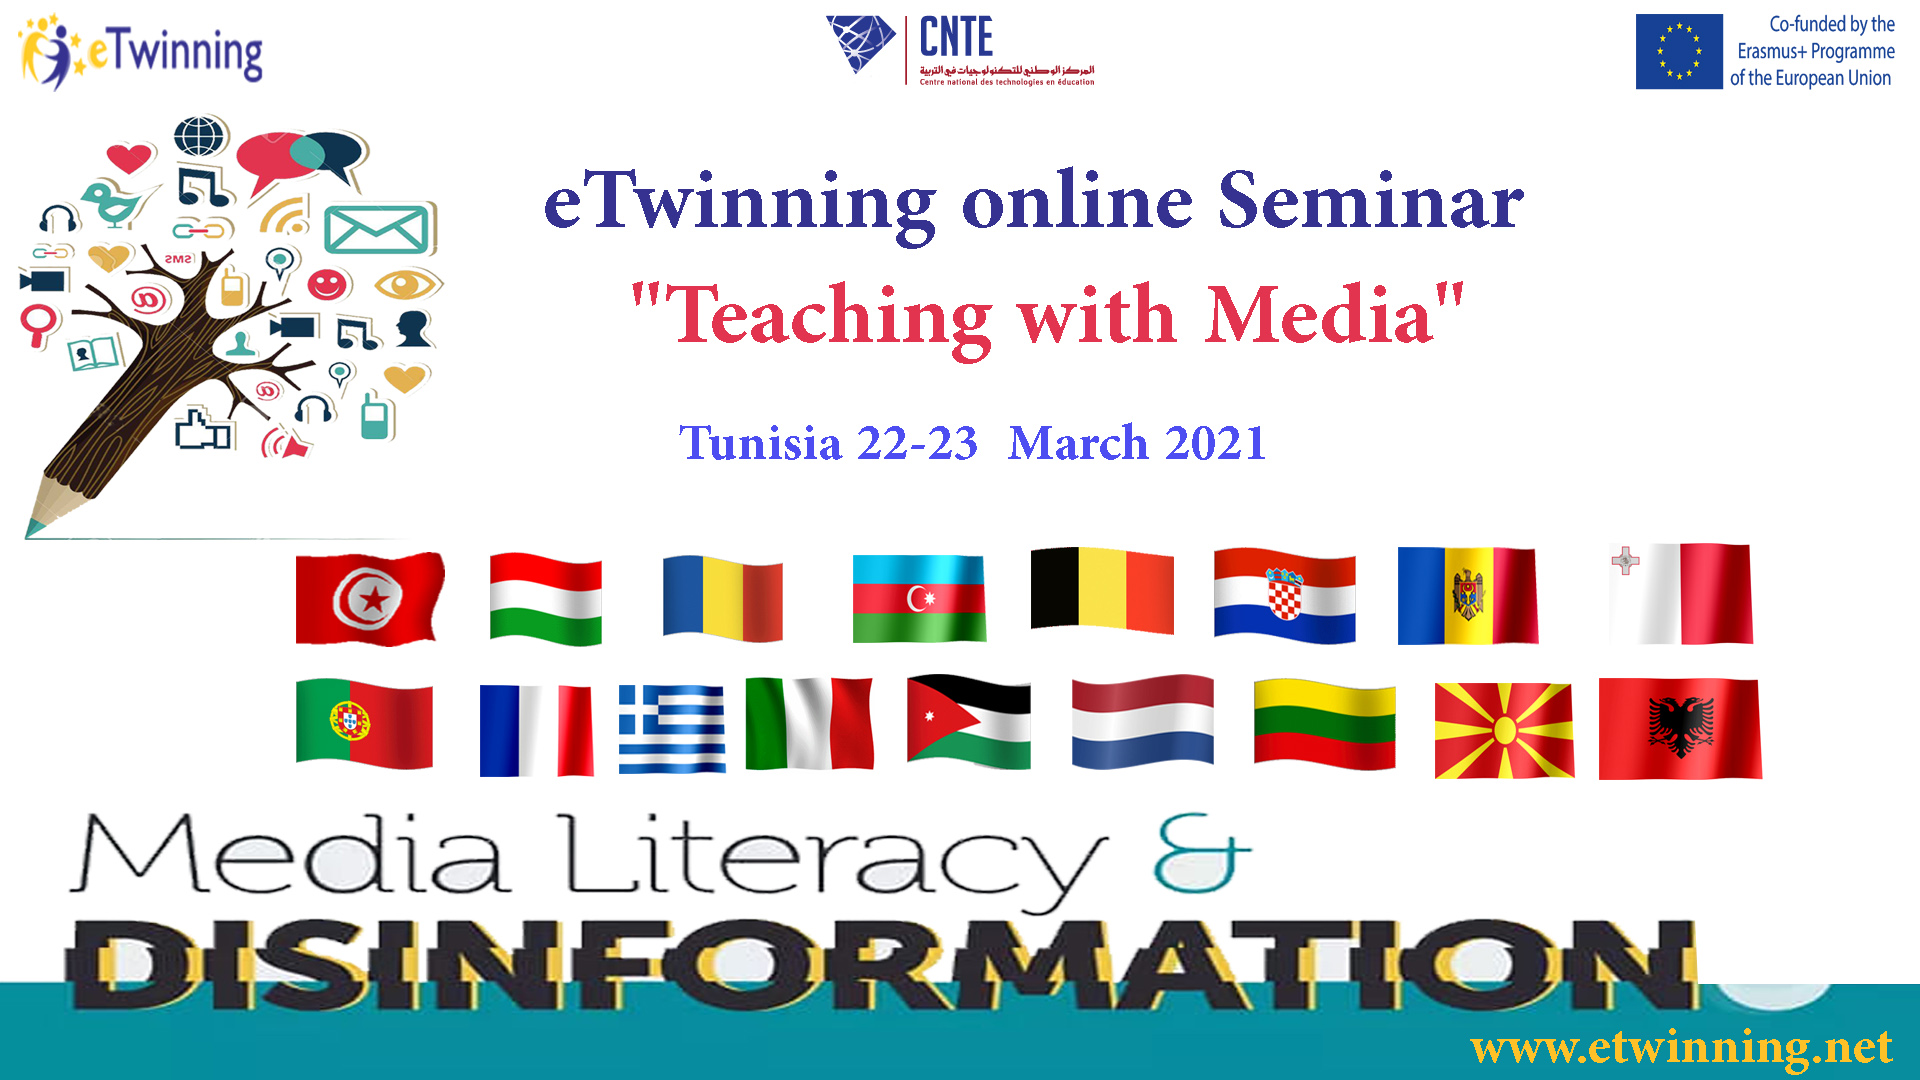 Online seminar on "Teaching with Media"